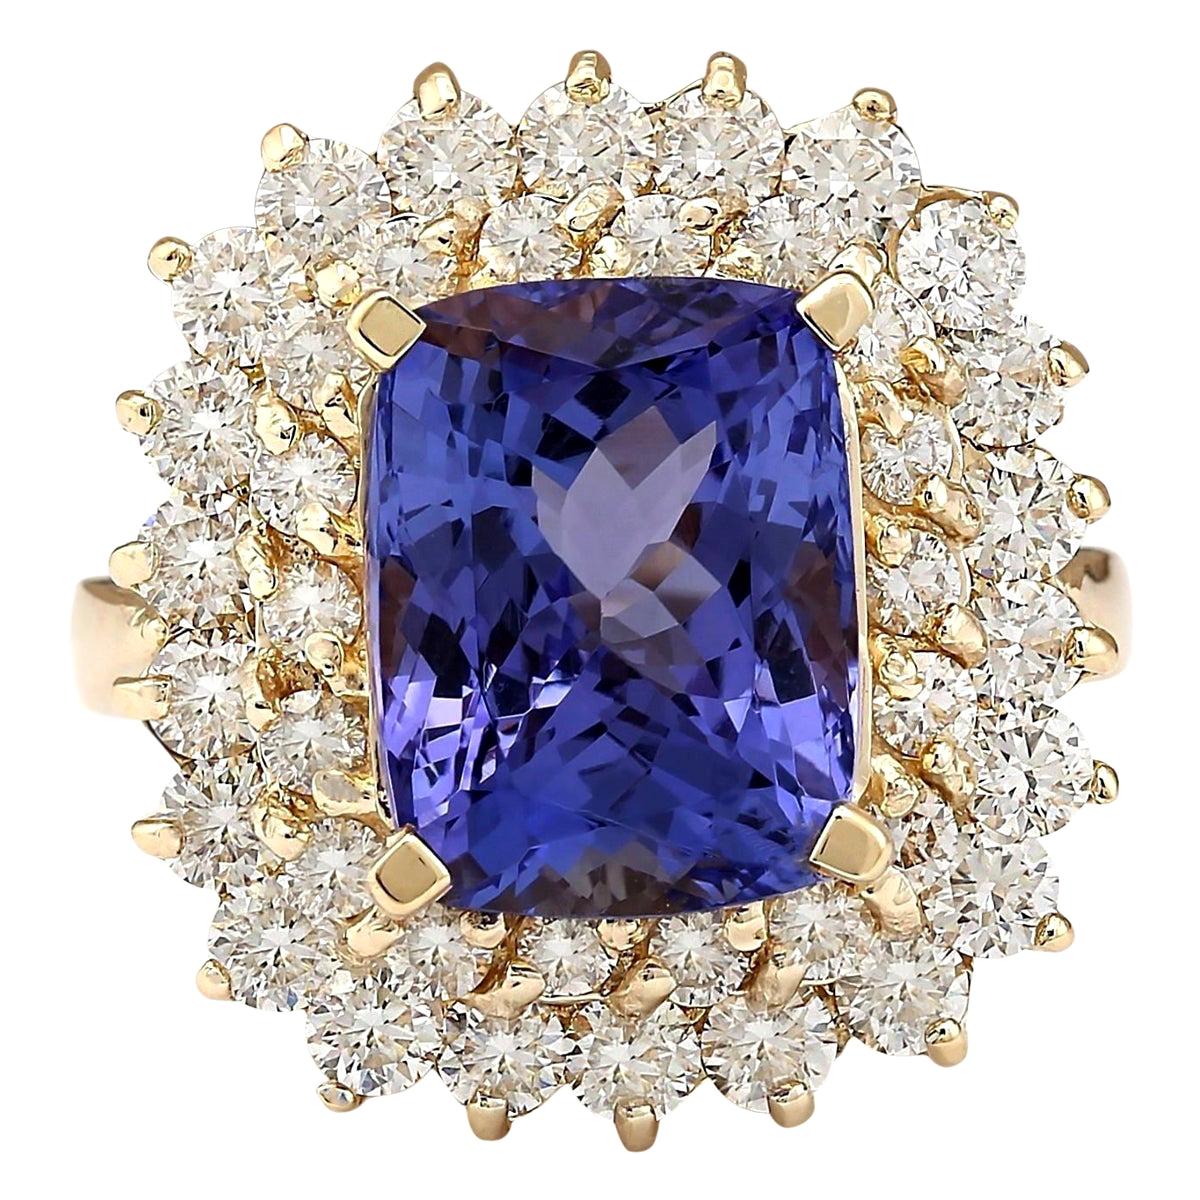 Exquisite Natural Tanzanite and Diamond Ring in 14K Yellow Gold